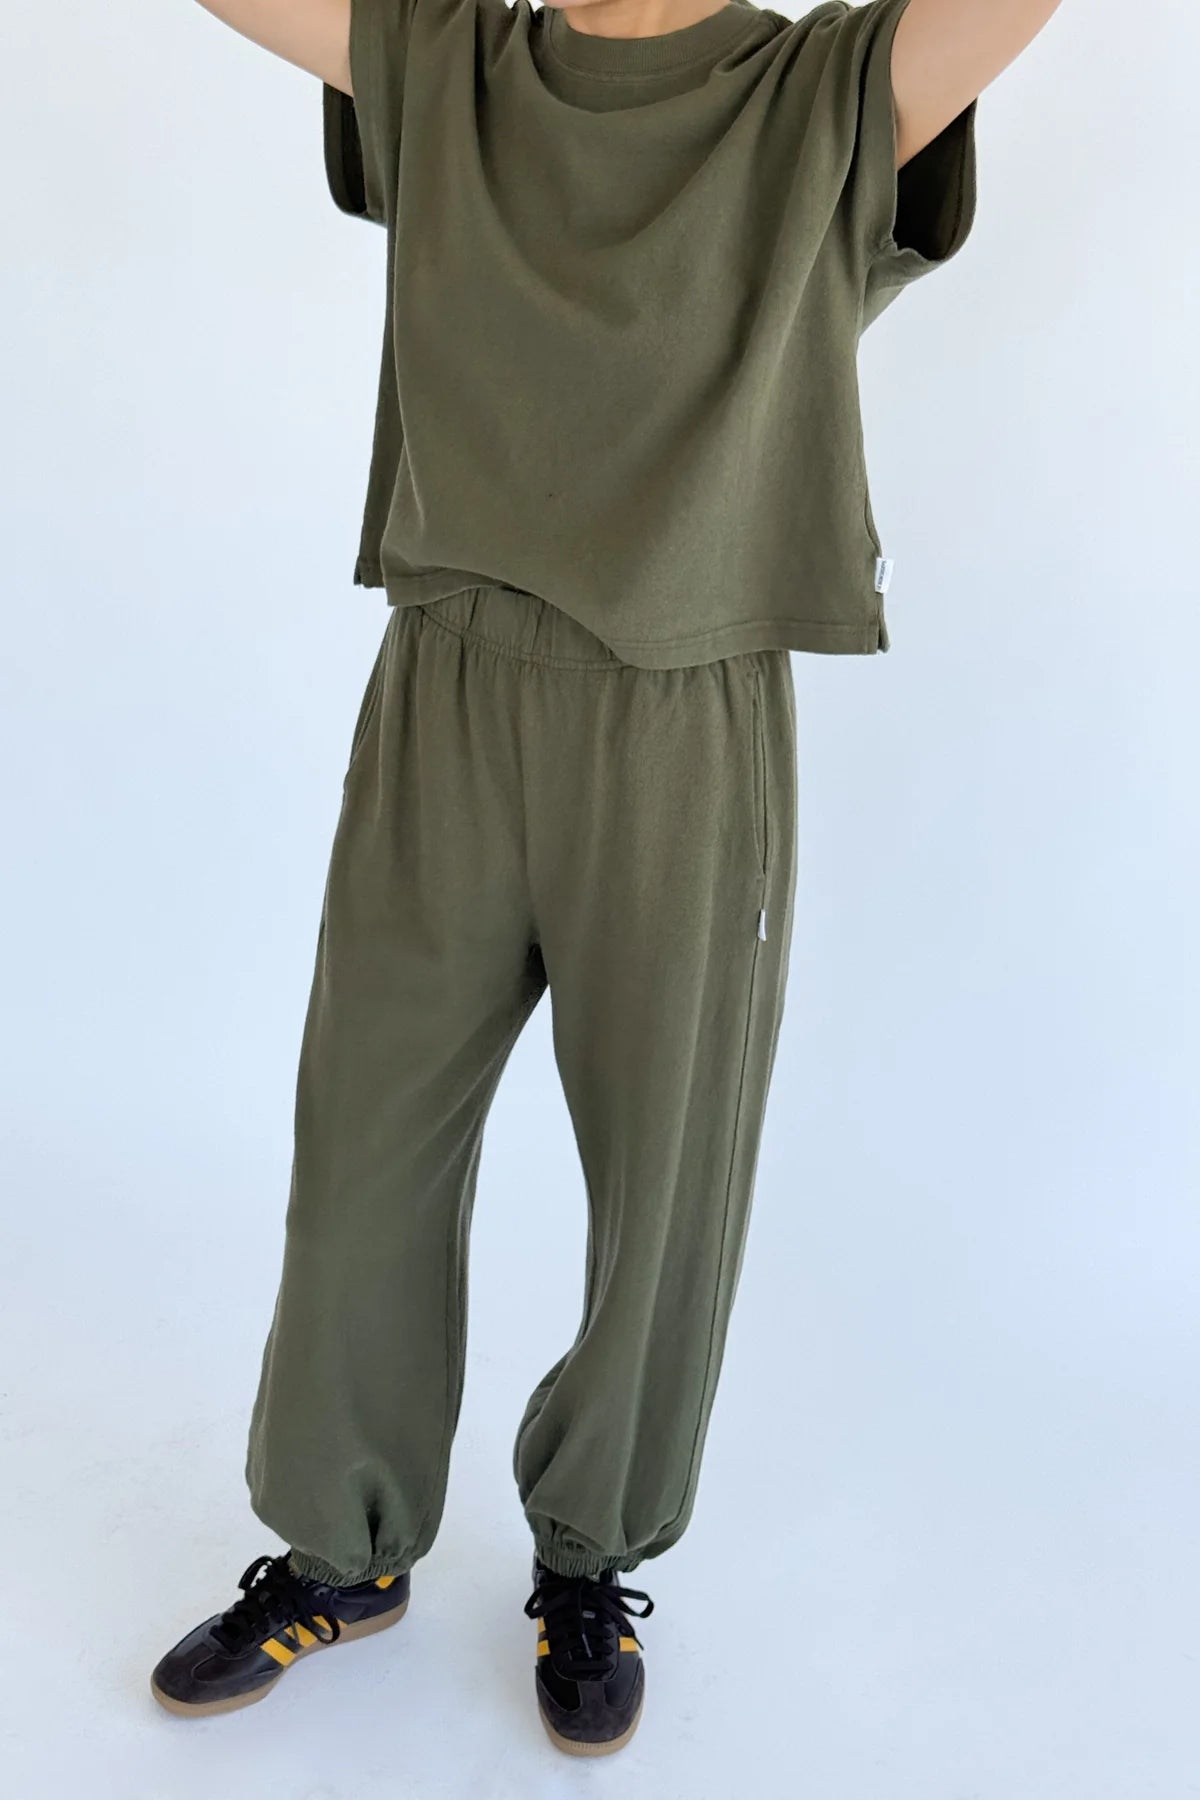 Balloon Pants in Olive Green